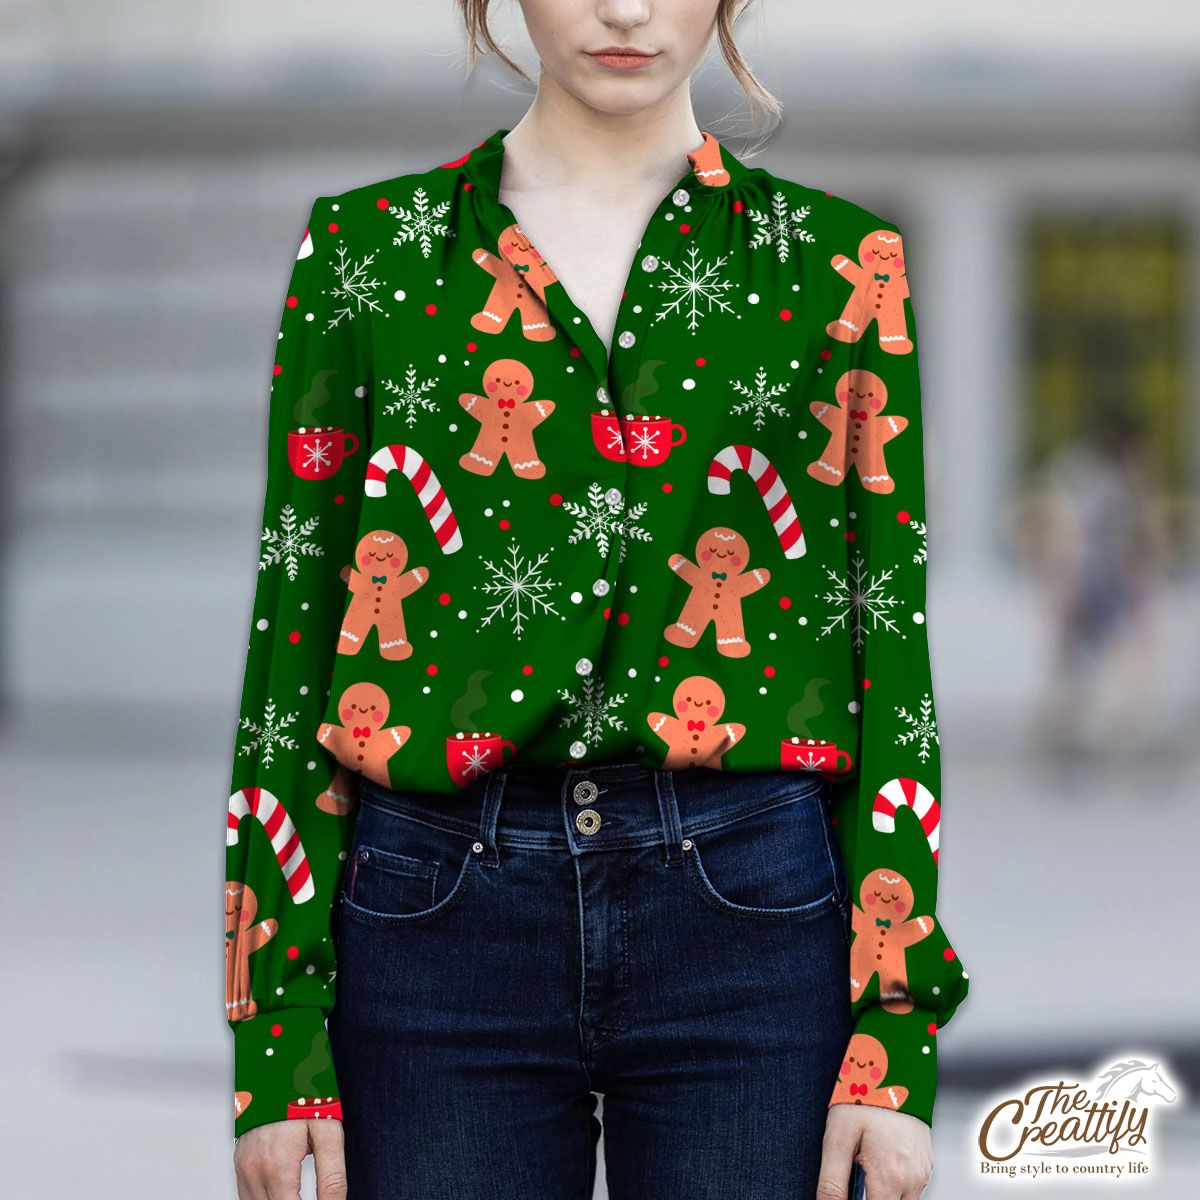 Red Green And White Gingerbread Man, Candy Cane With Snowflake V-Neckline Blouses